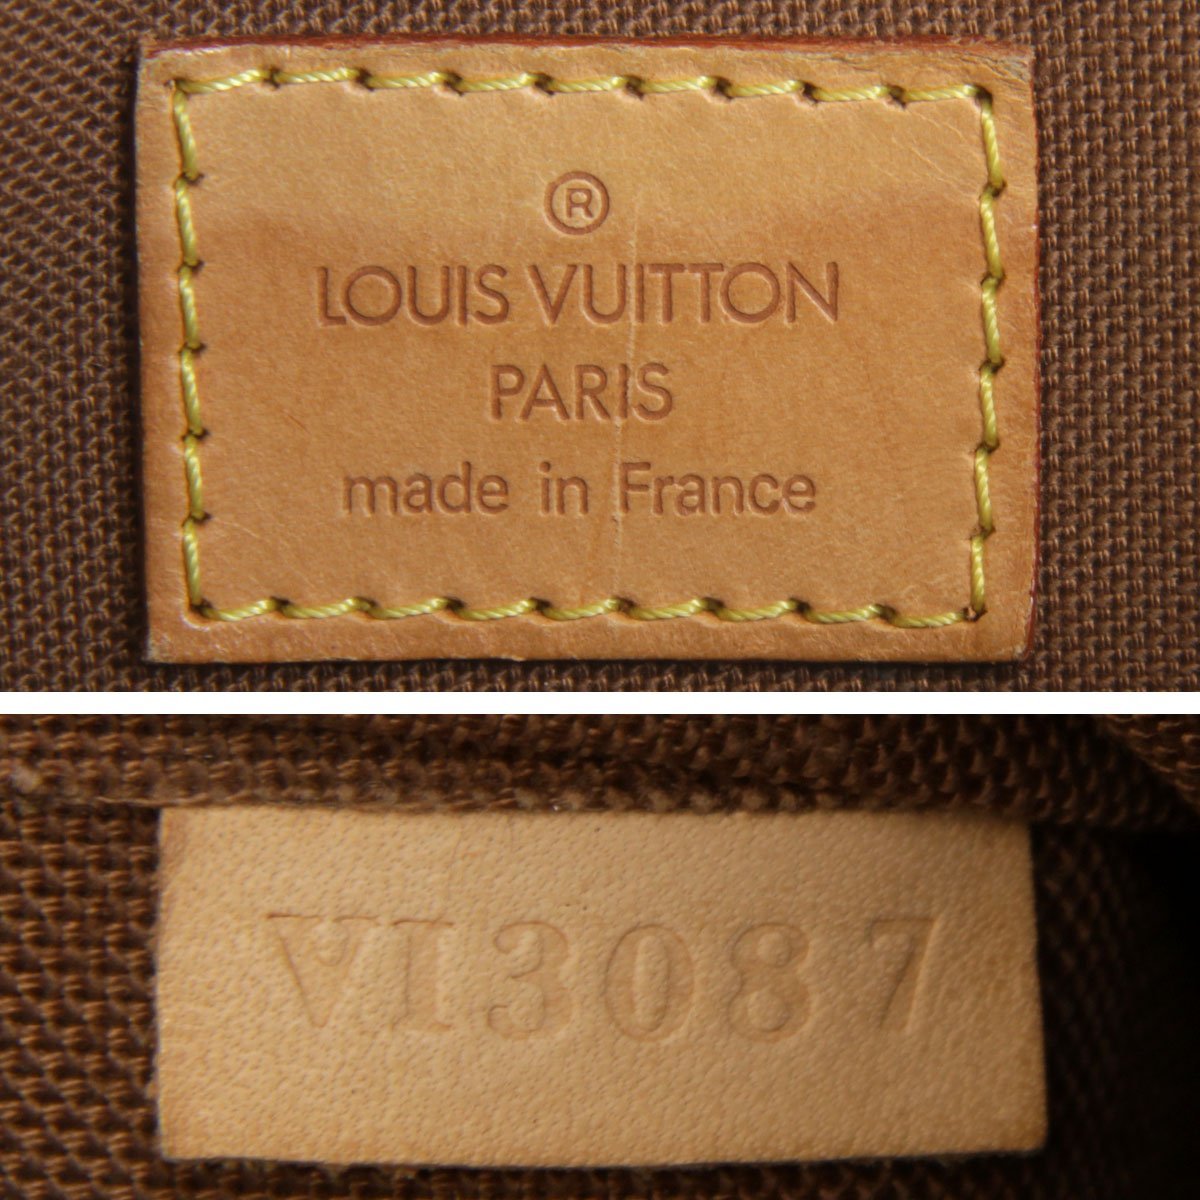 SALE／87%OFF】 美品 USED LOUIS VUITTON ルイ ヴィトン